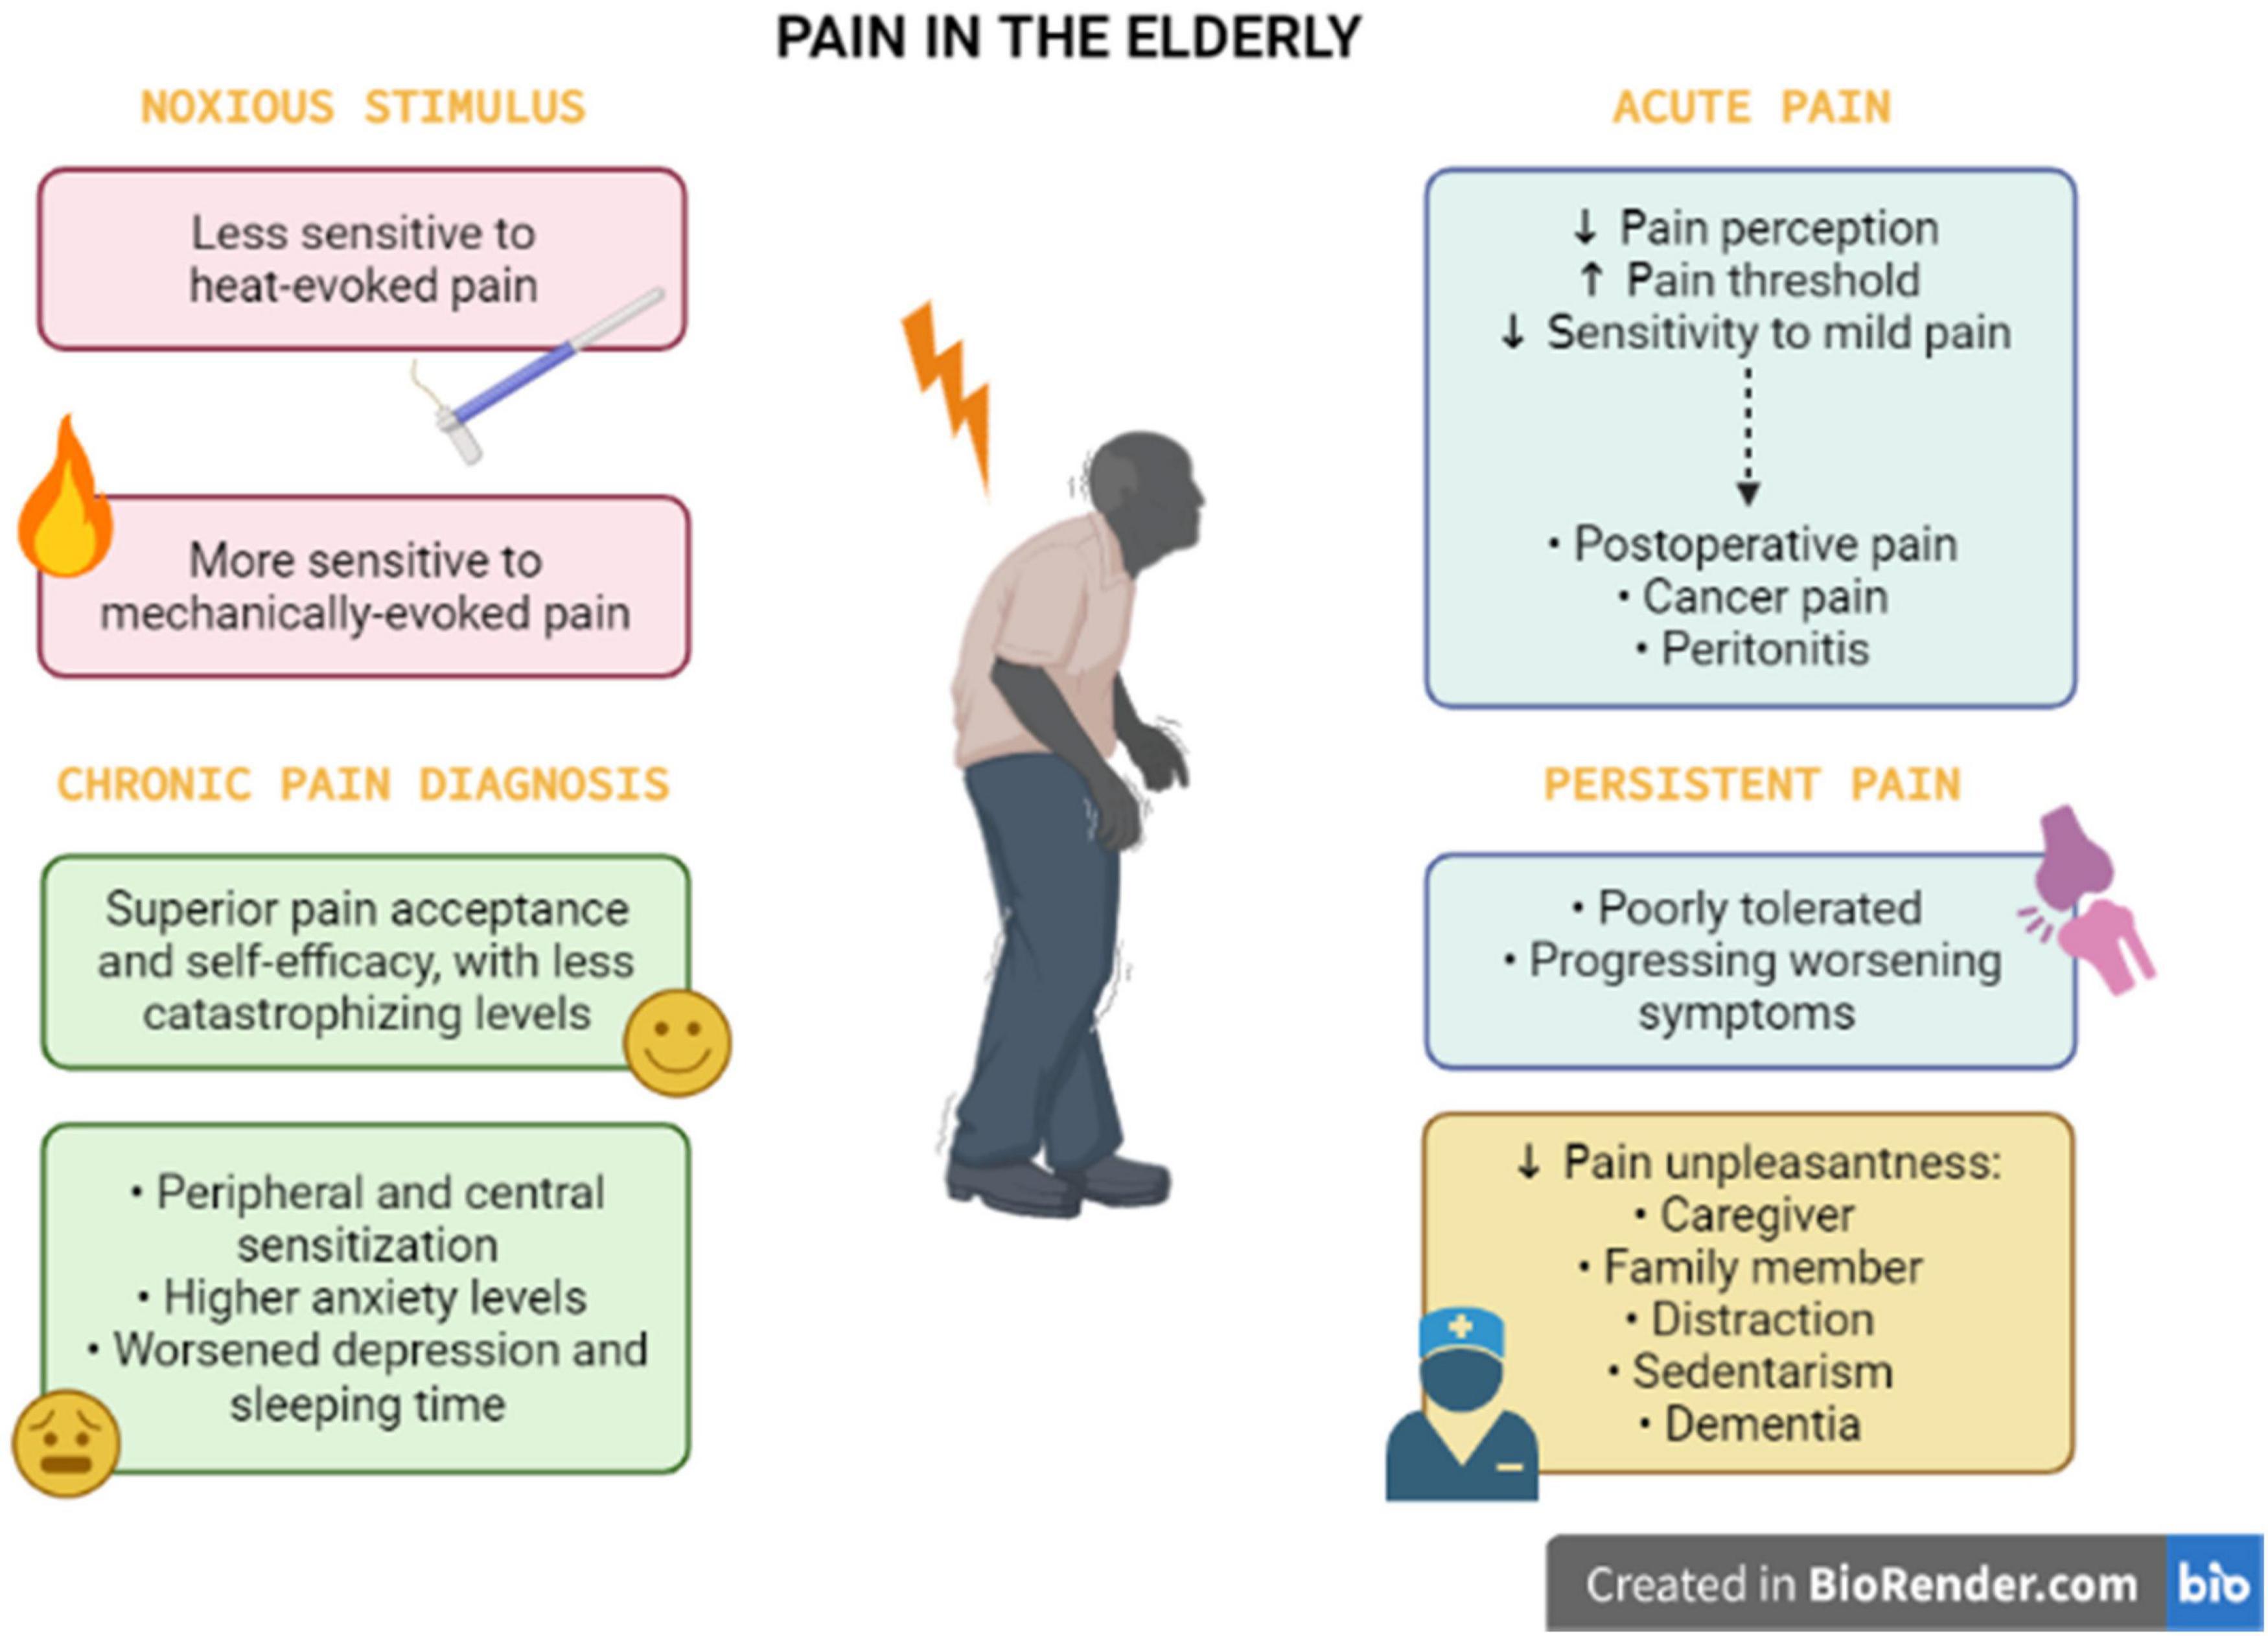 Considerations for Individualized Pain Management Plans